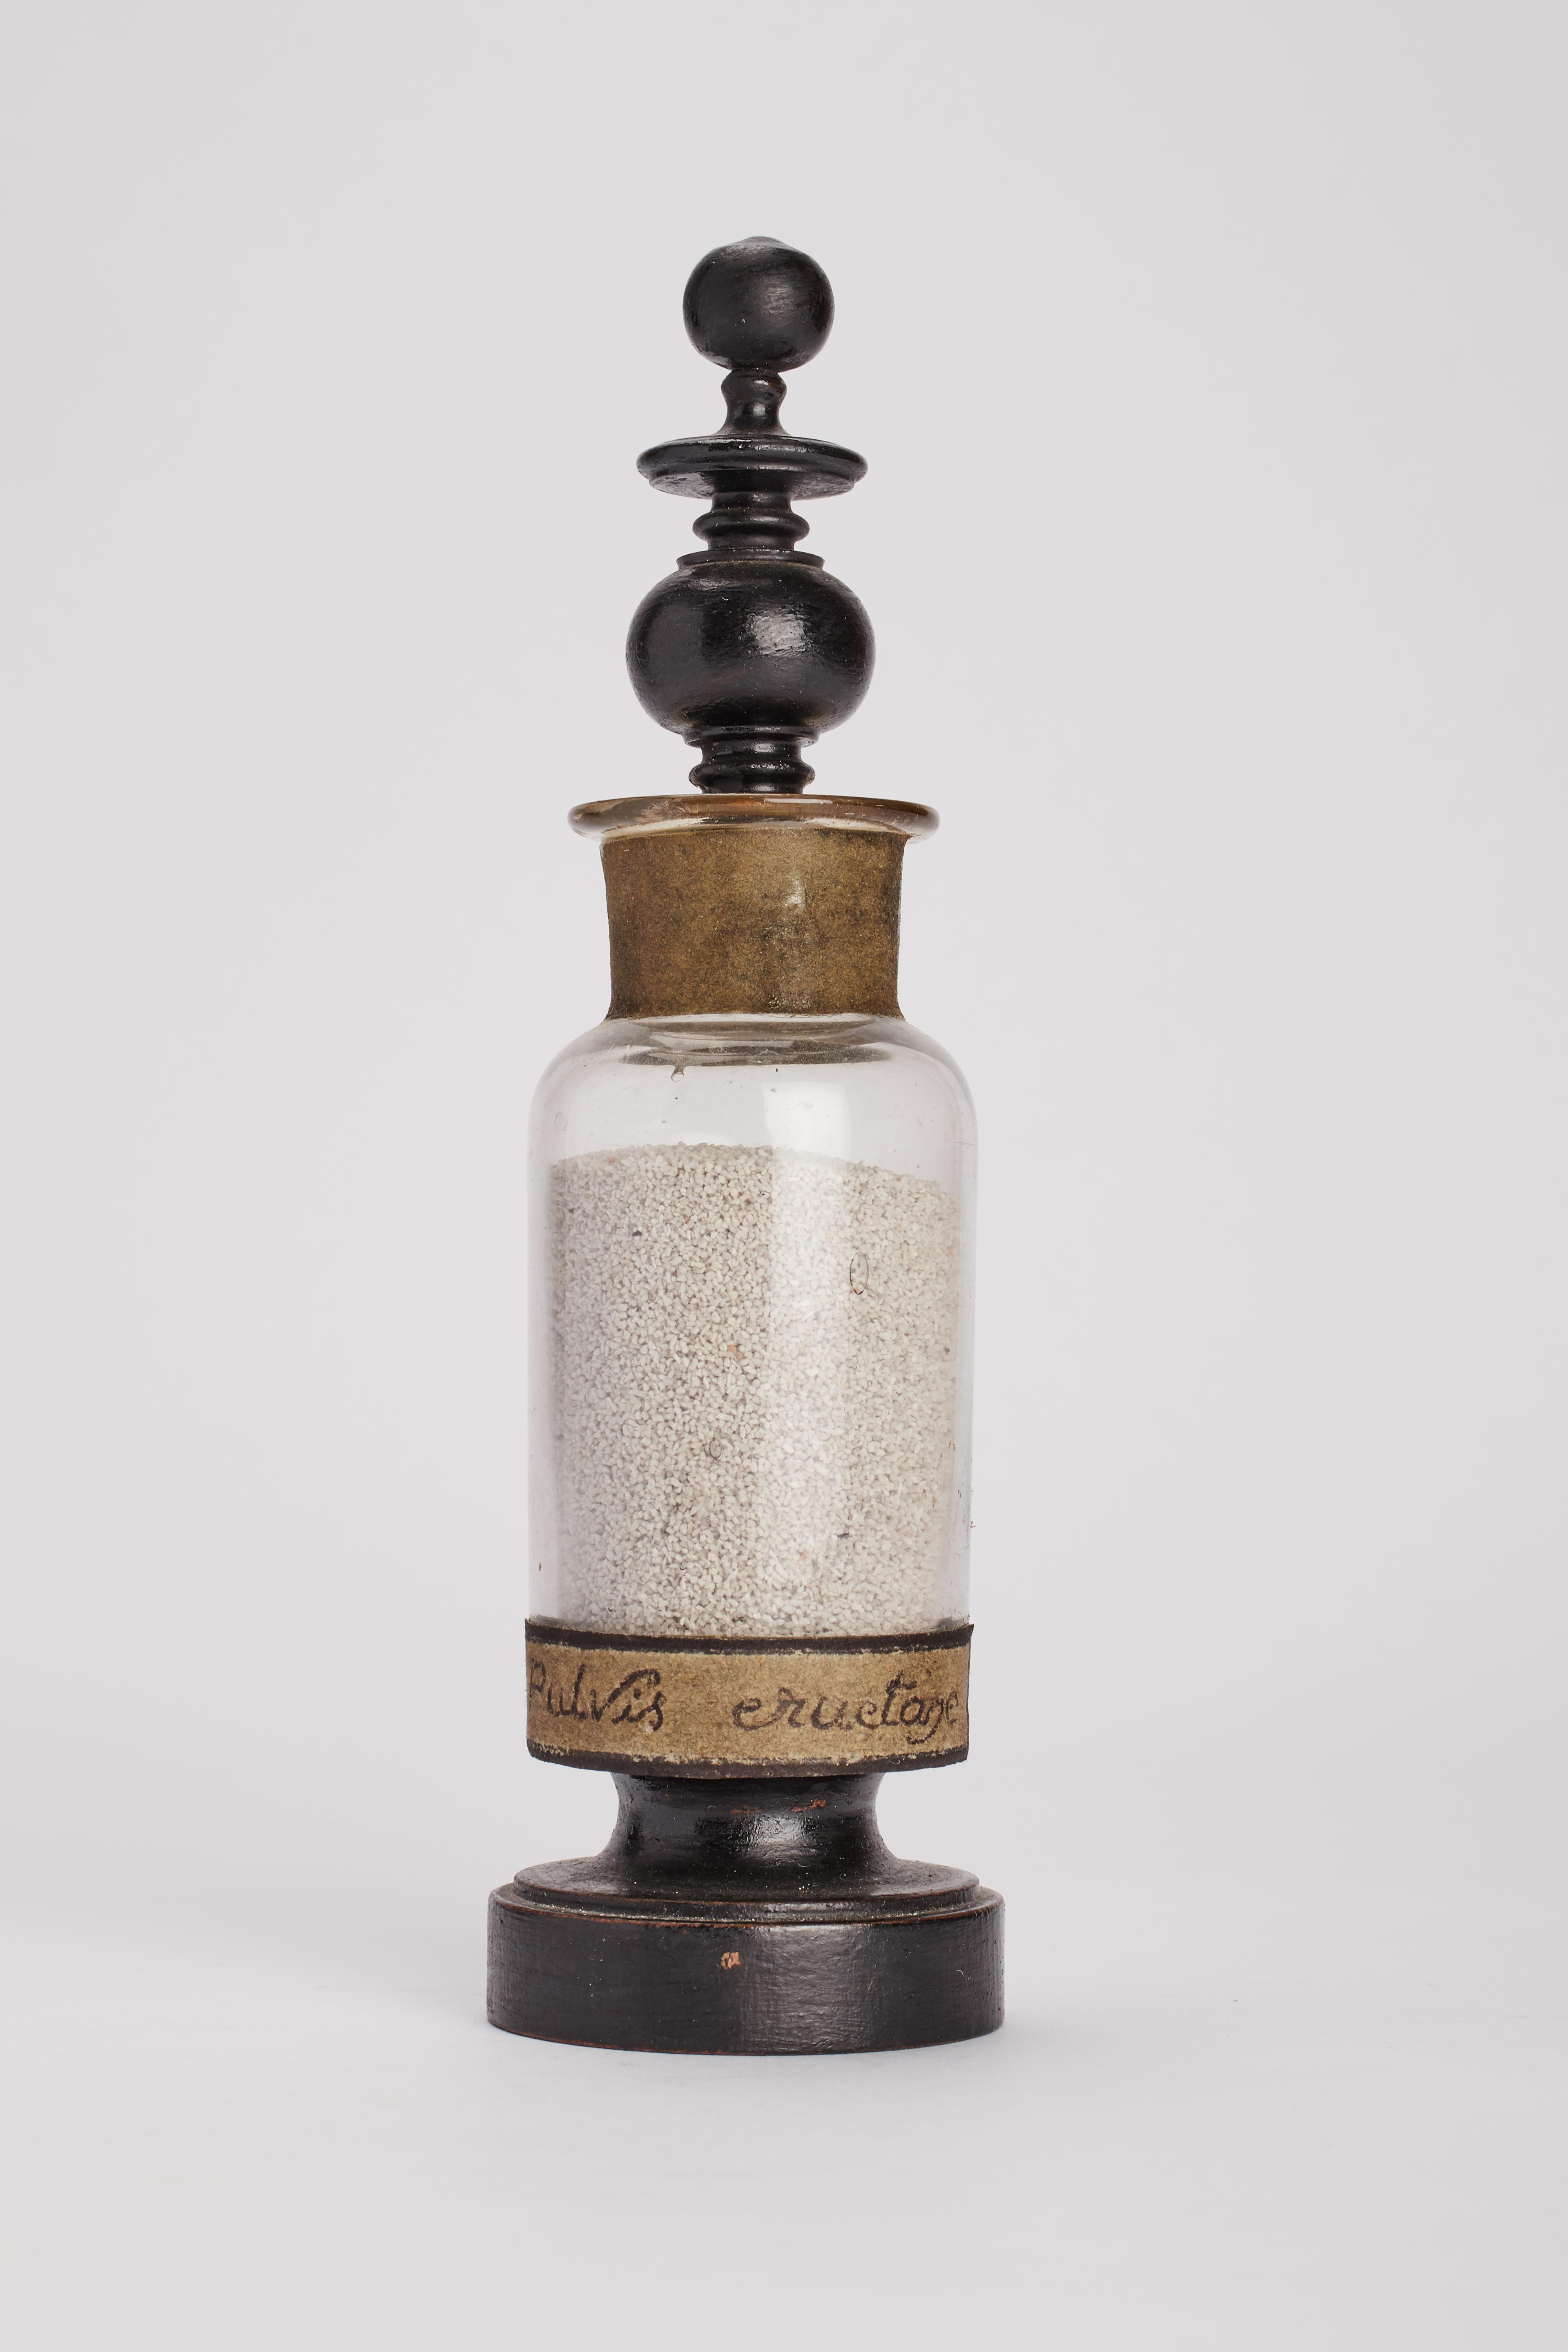 Specimen from wunderkammer, a glass ampoule with turned fruitwood lid painted black and label on the front. The paper label reads: Pulvis eructanea. France circa 1870.